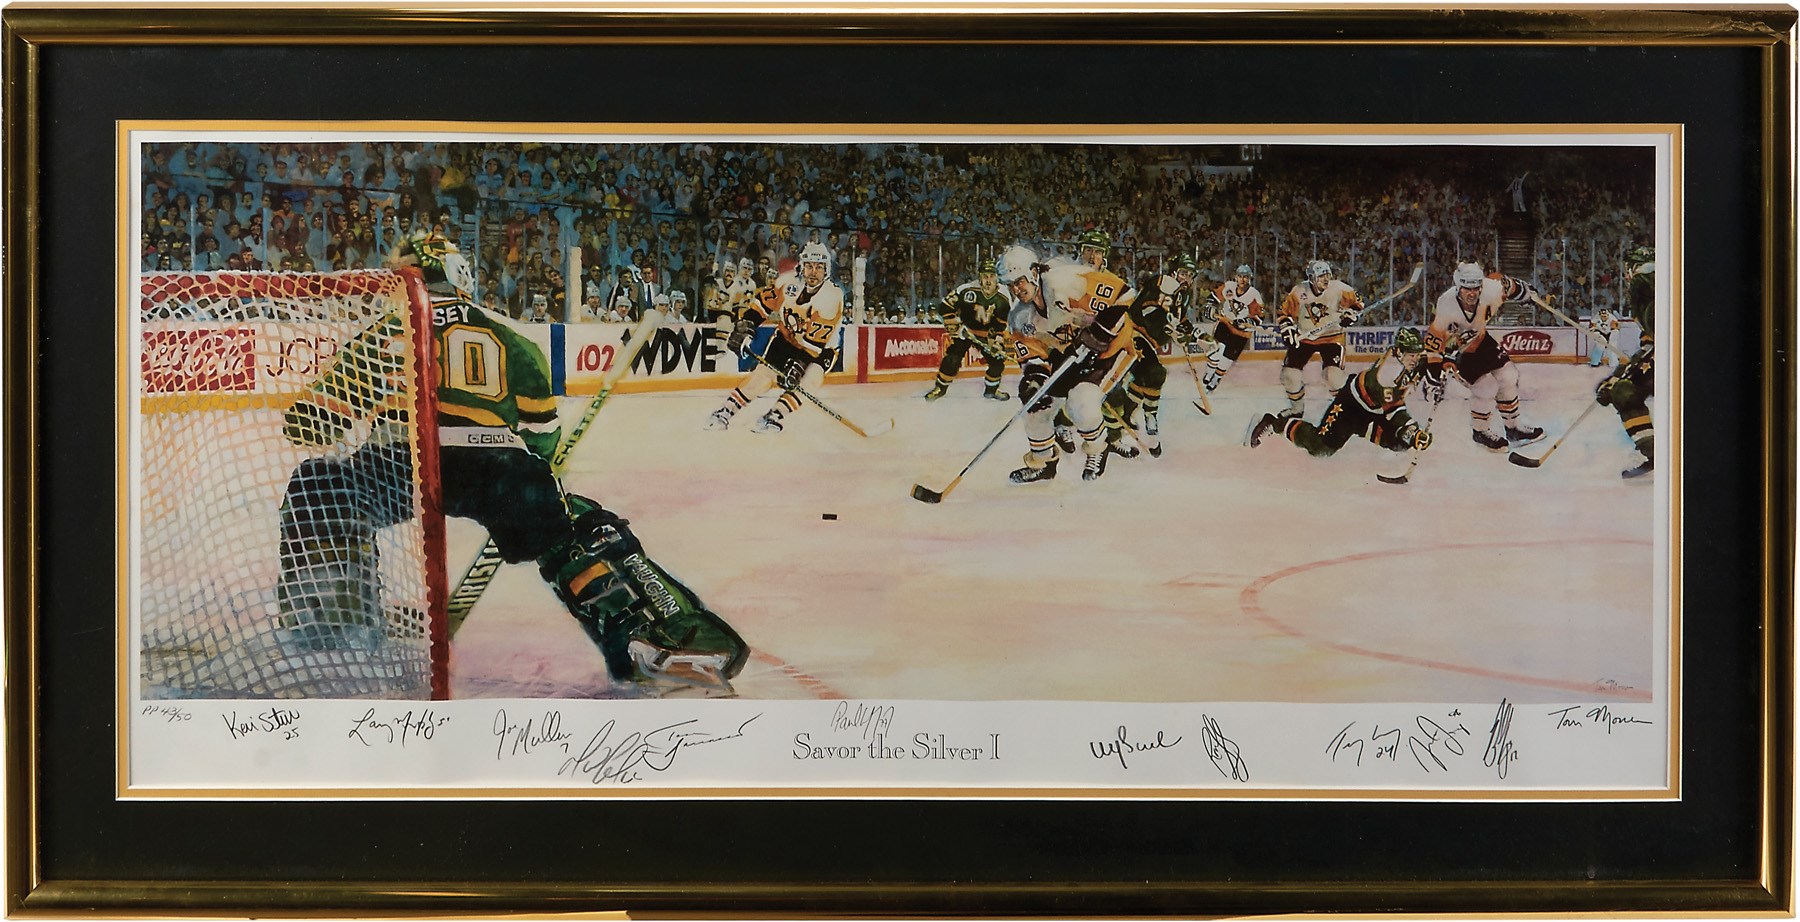 1990-91 Pittsburgh Penguins Stanley Cup Champions Signed Lithograph